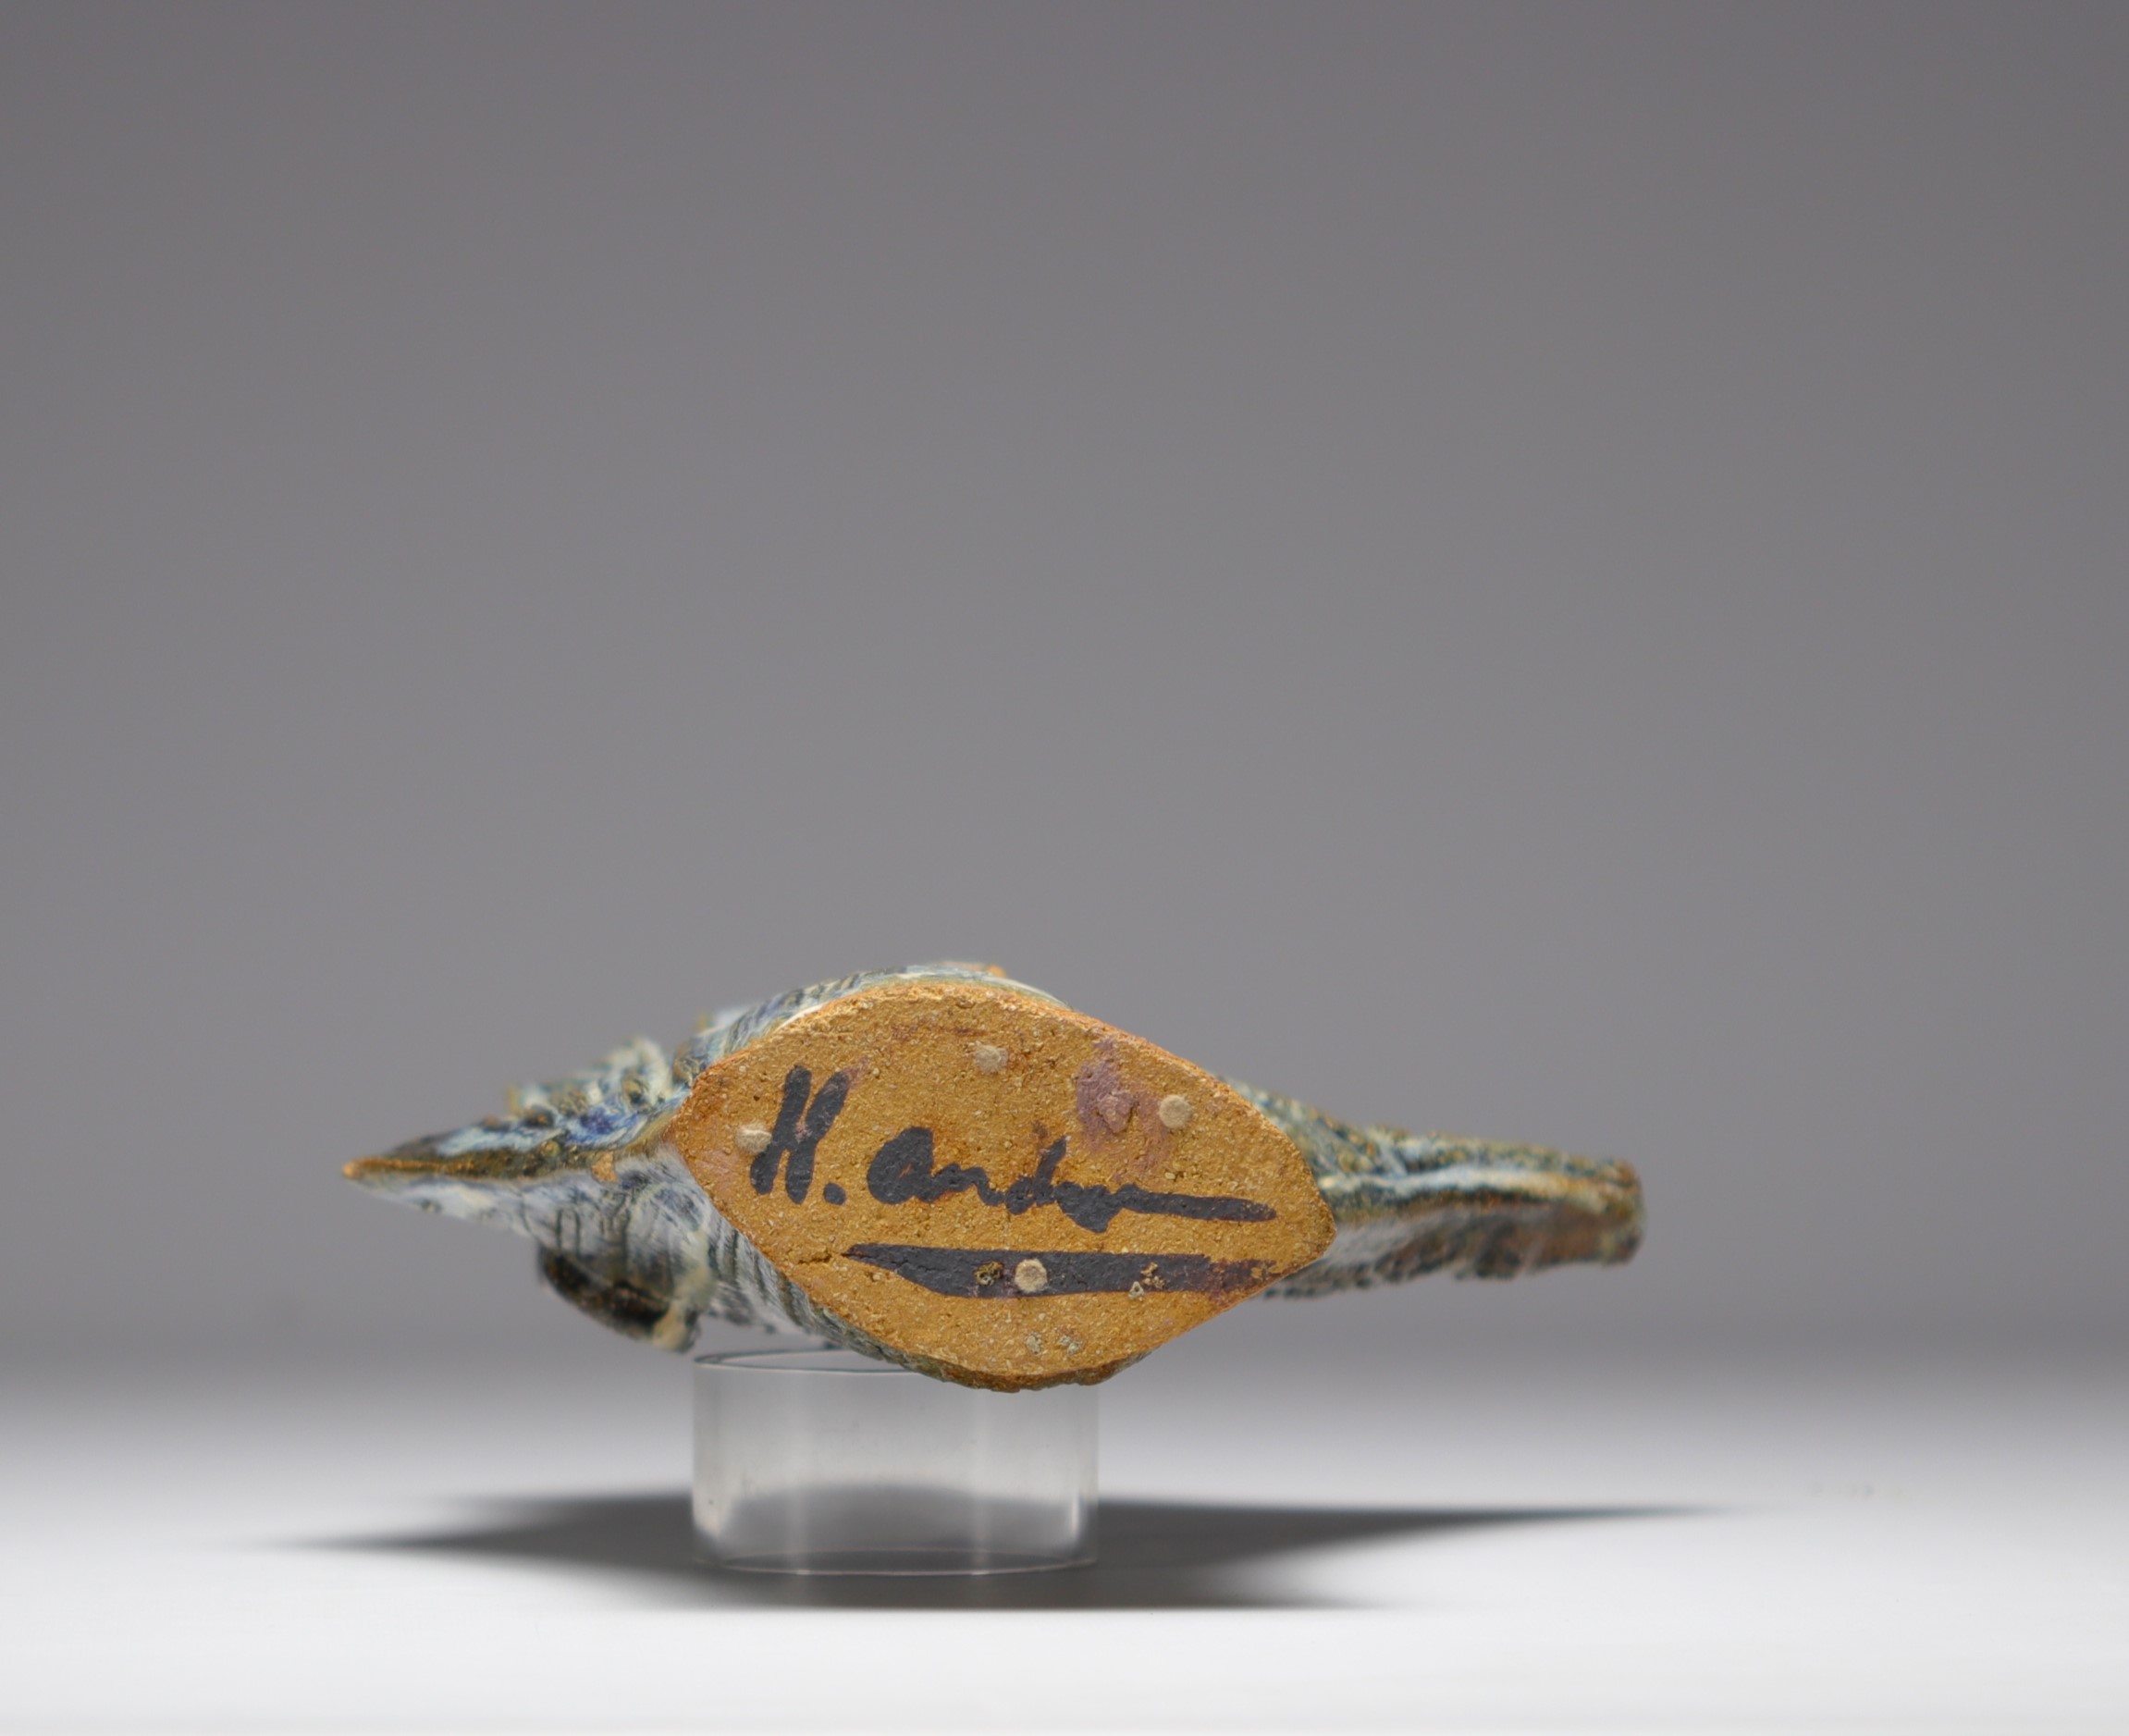 Zoomorphic sculpture in glazed terracotta, signed below the piece. - Image 5 of 5